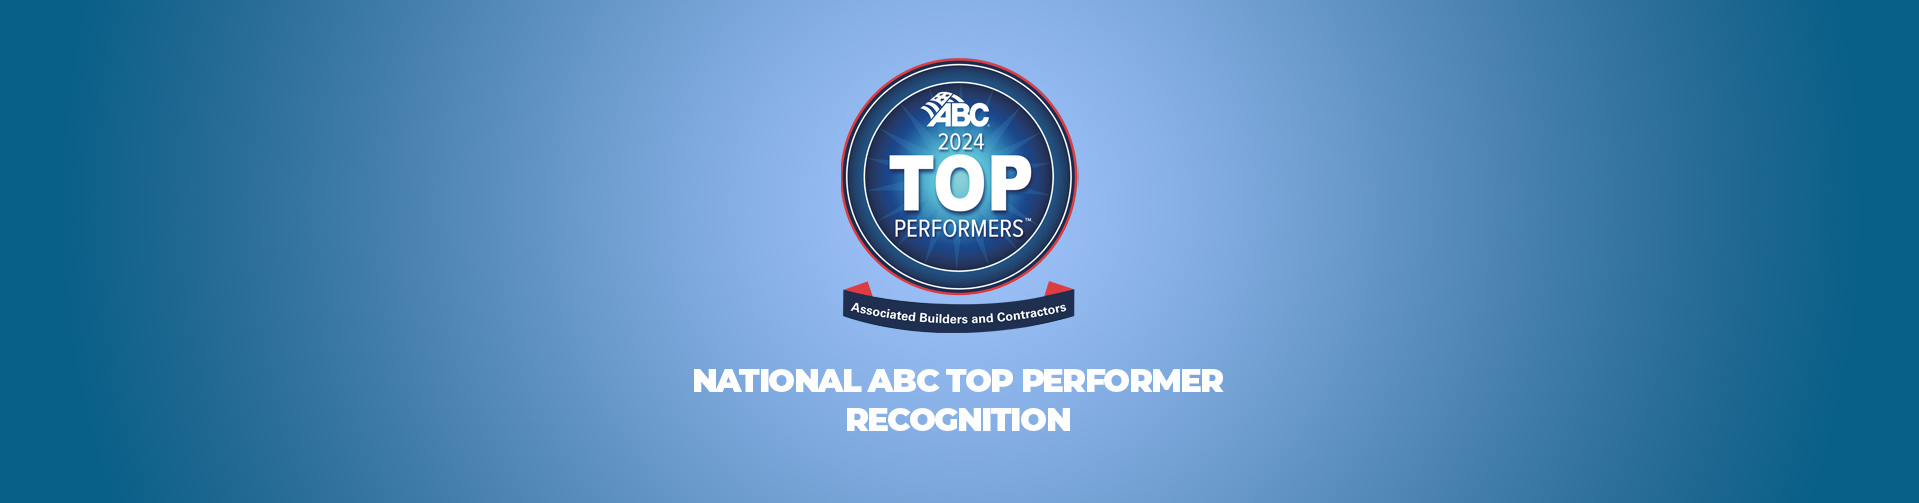 ABC TOP PERFORMER